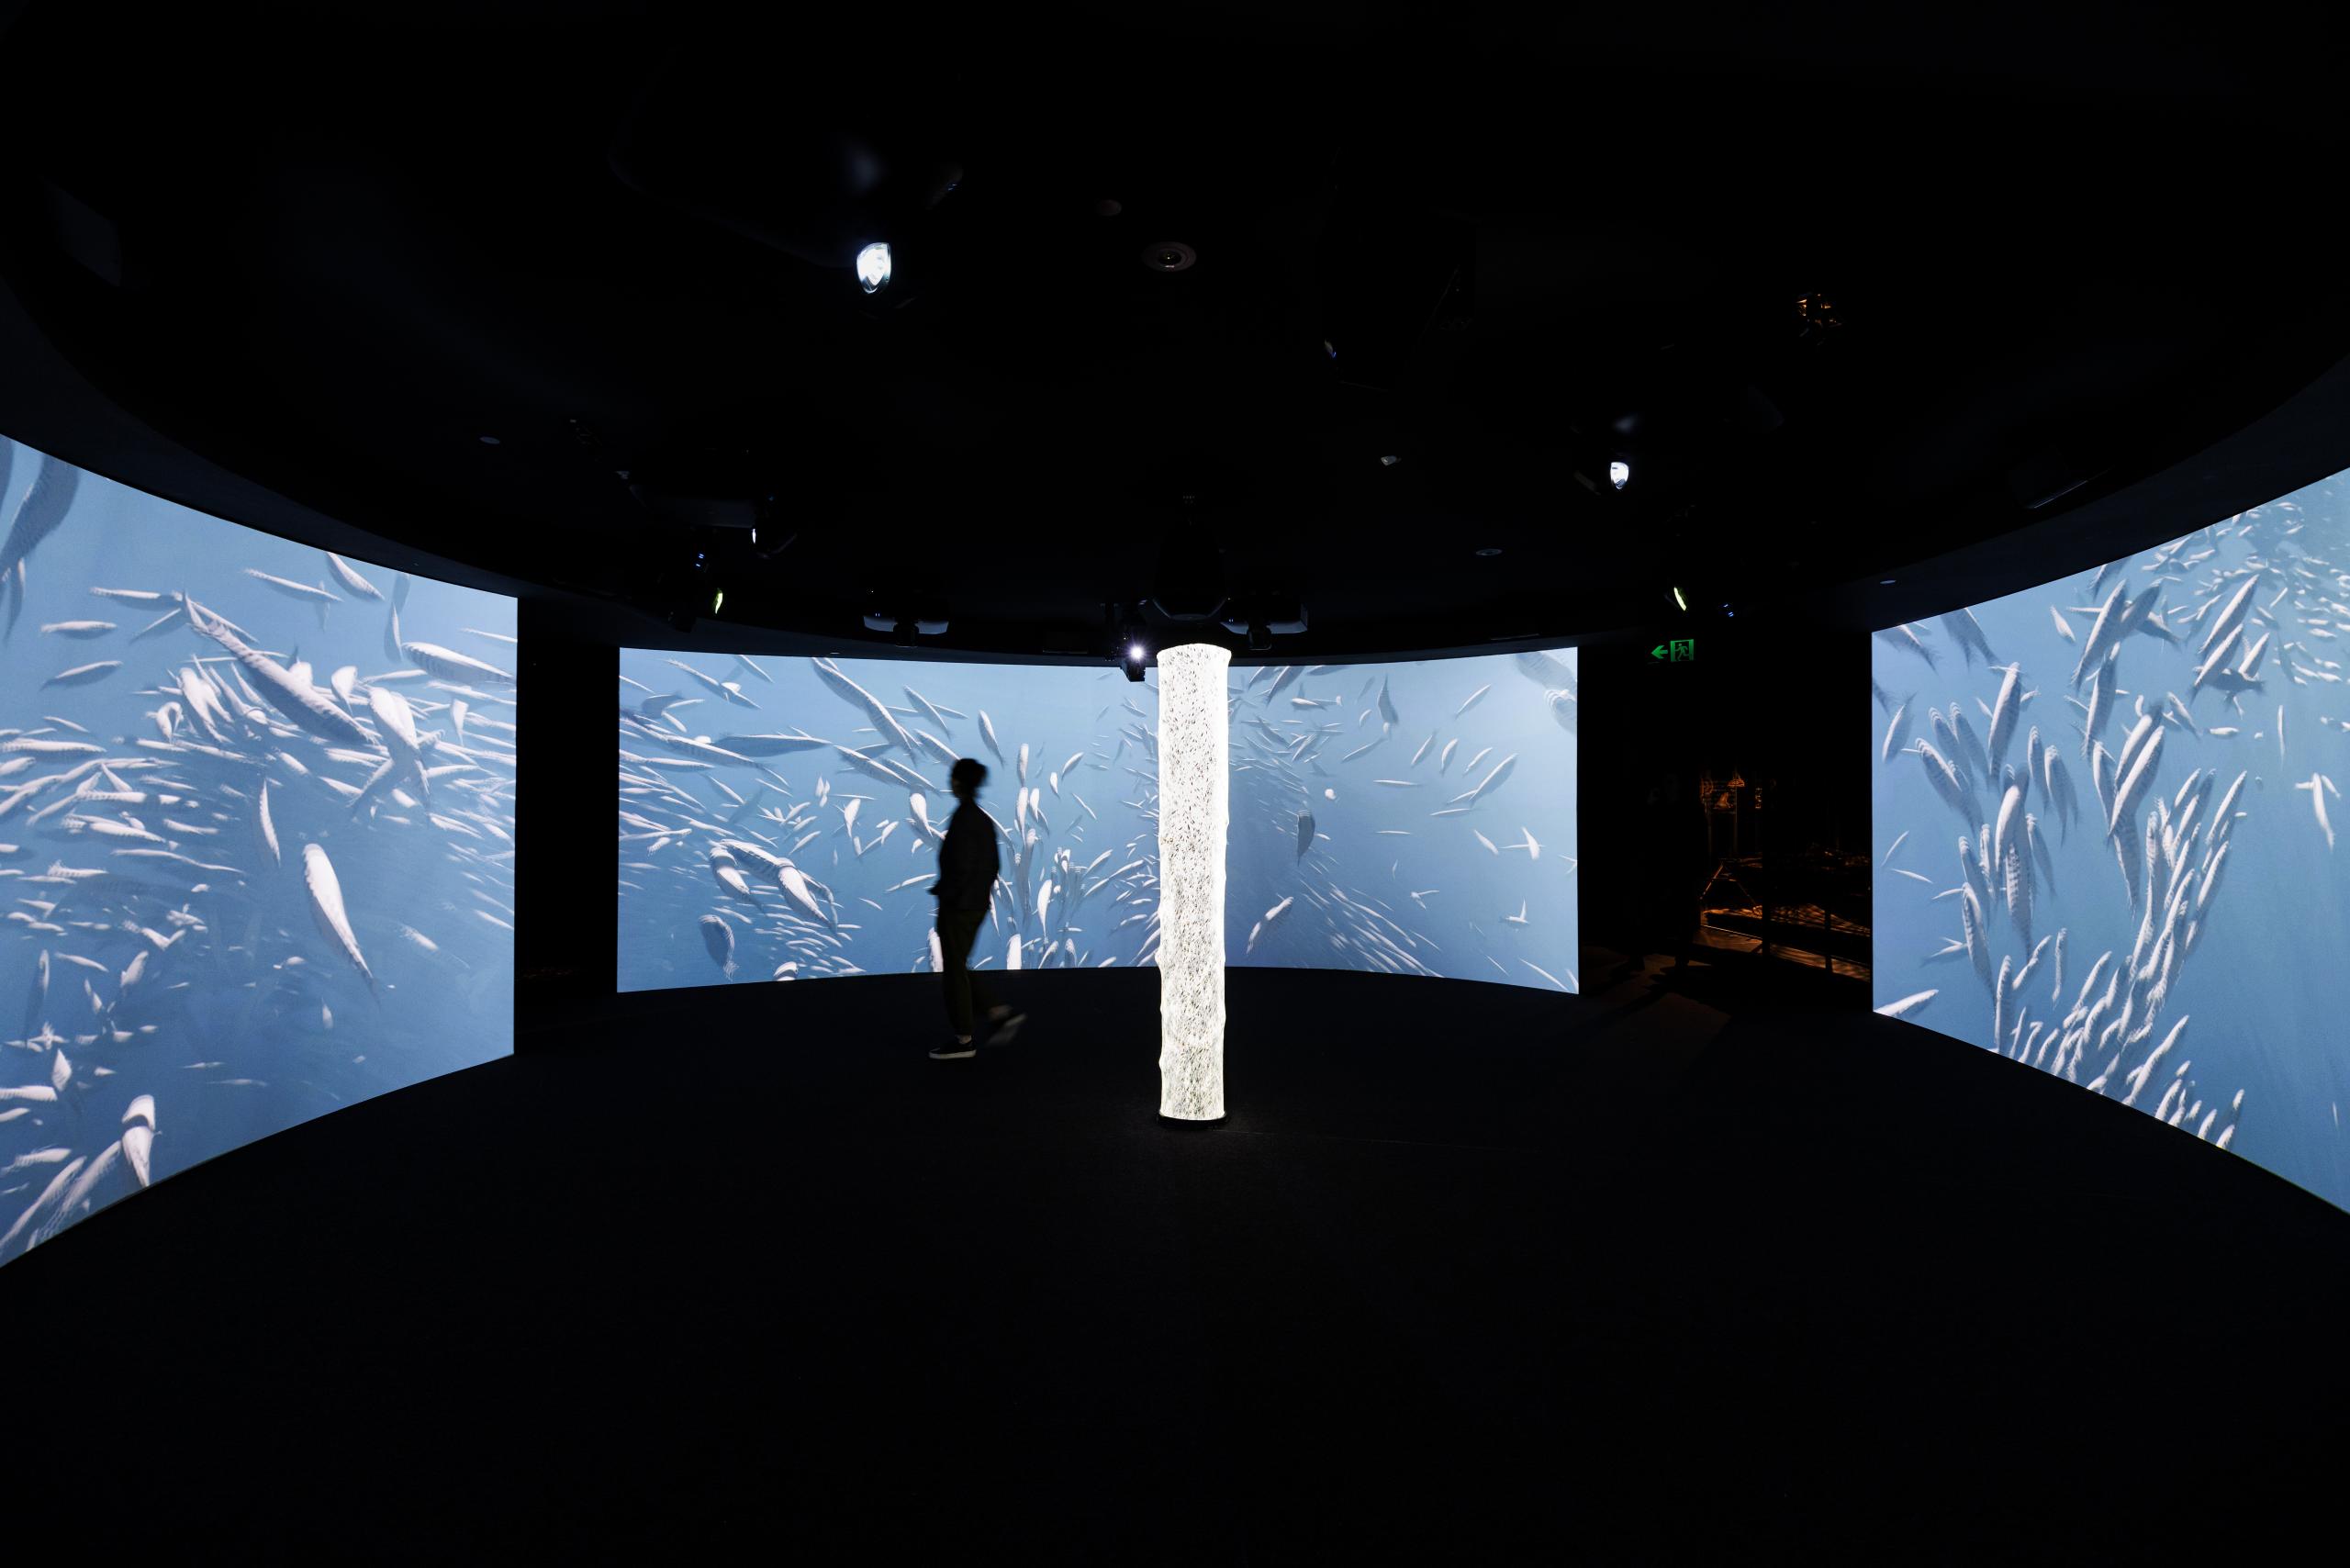 Exhibition view of digital immersive